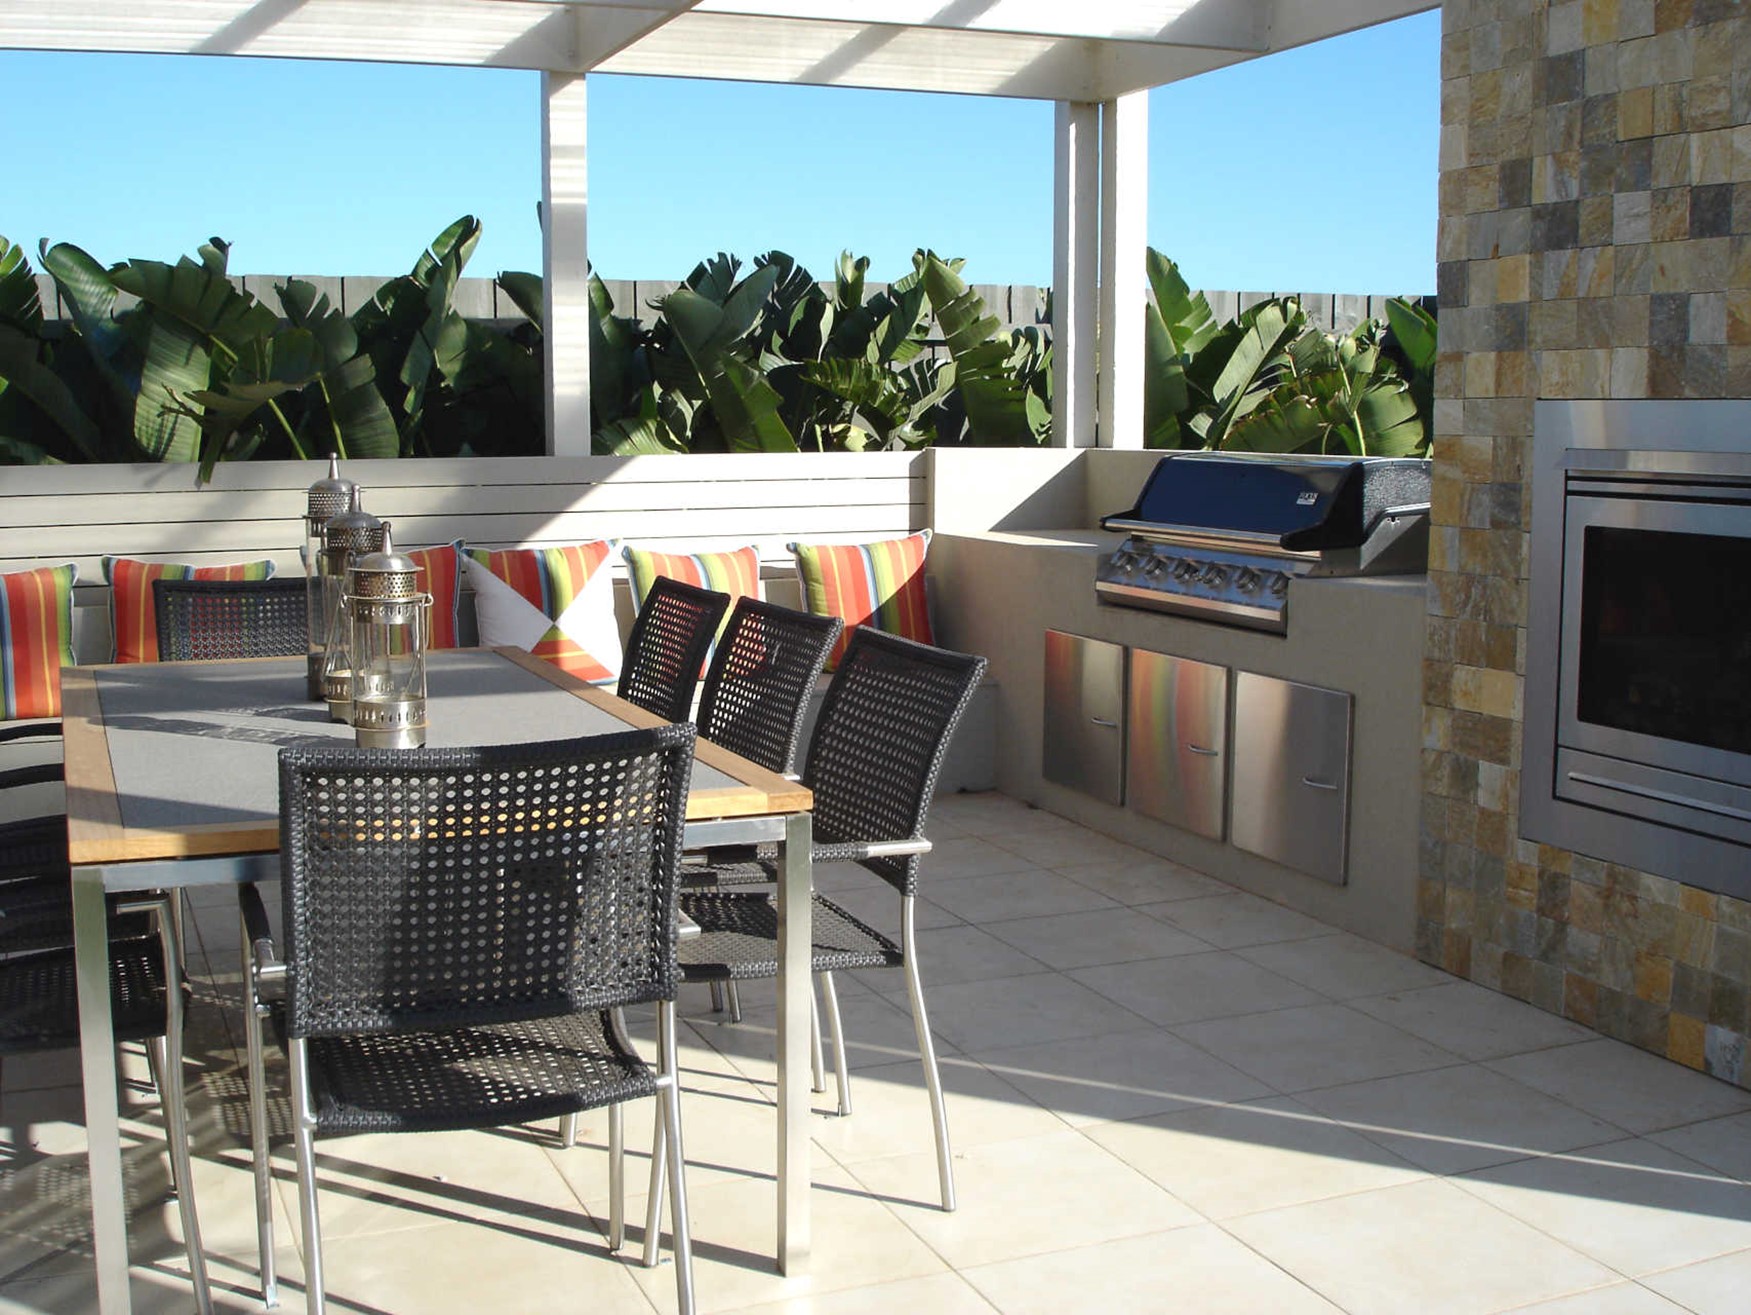 Well-maintained outdoor living space